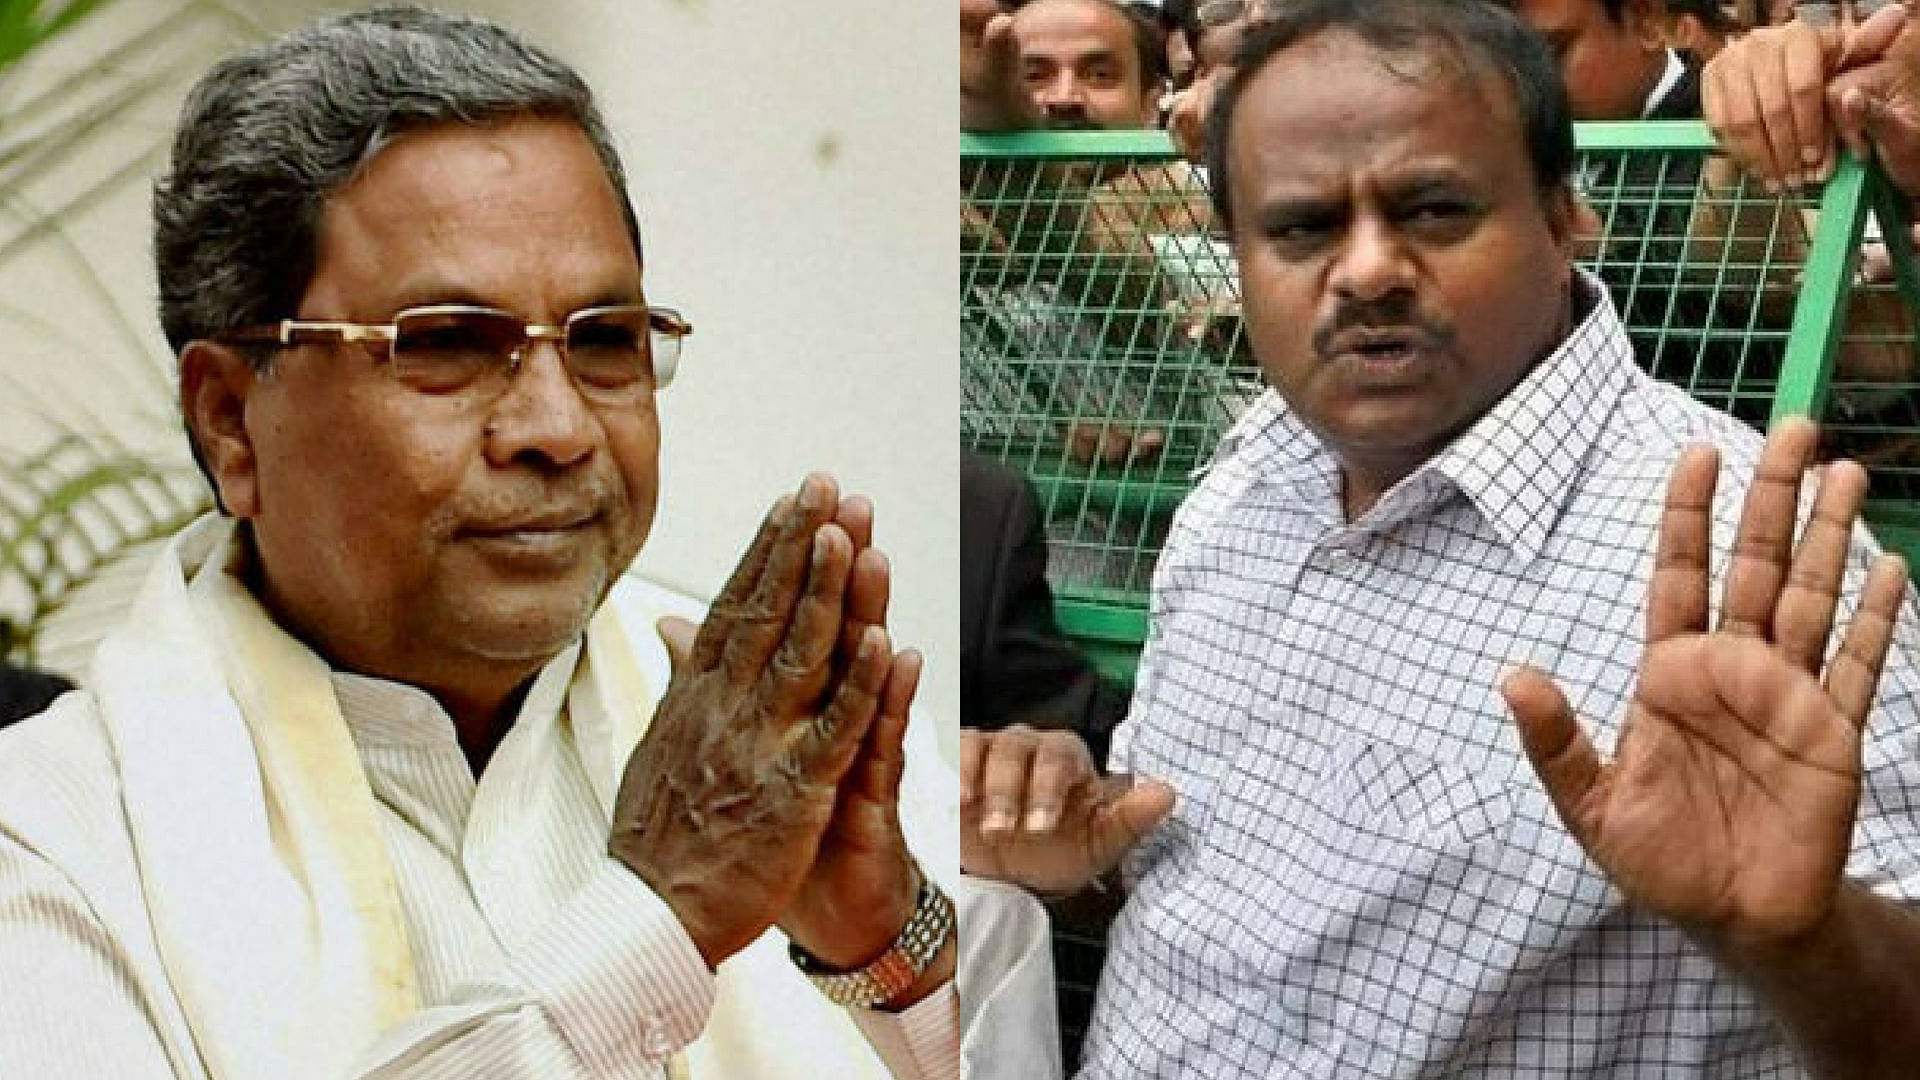 The Congress party has made its final bid to keep the BJP out of power in Karnataka, offering the chief ministerial post to the JD(S).